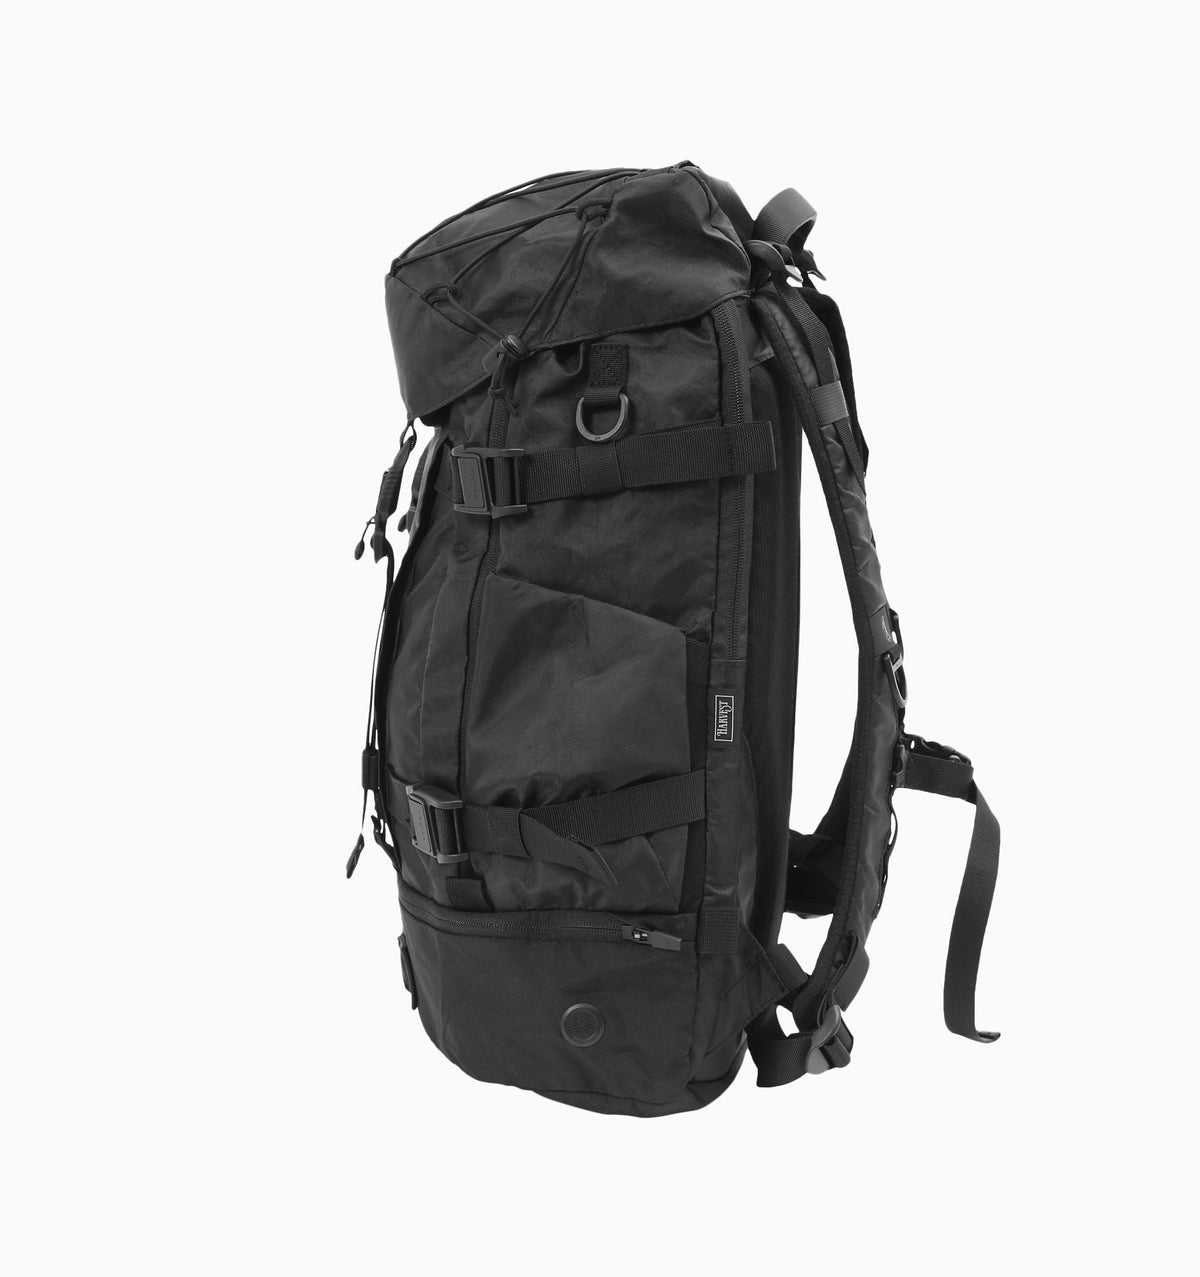 Code of Bell 16" 4020X Backpack 30L - Pitch Black